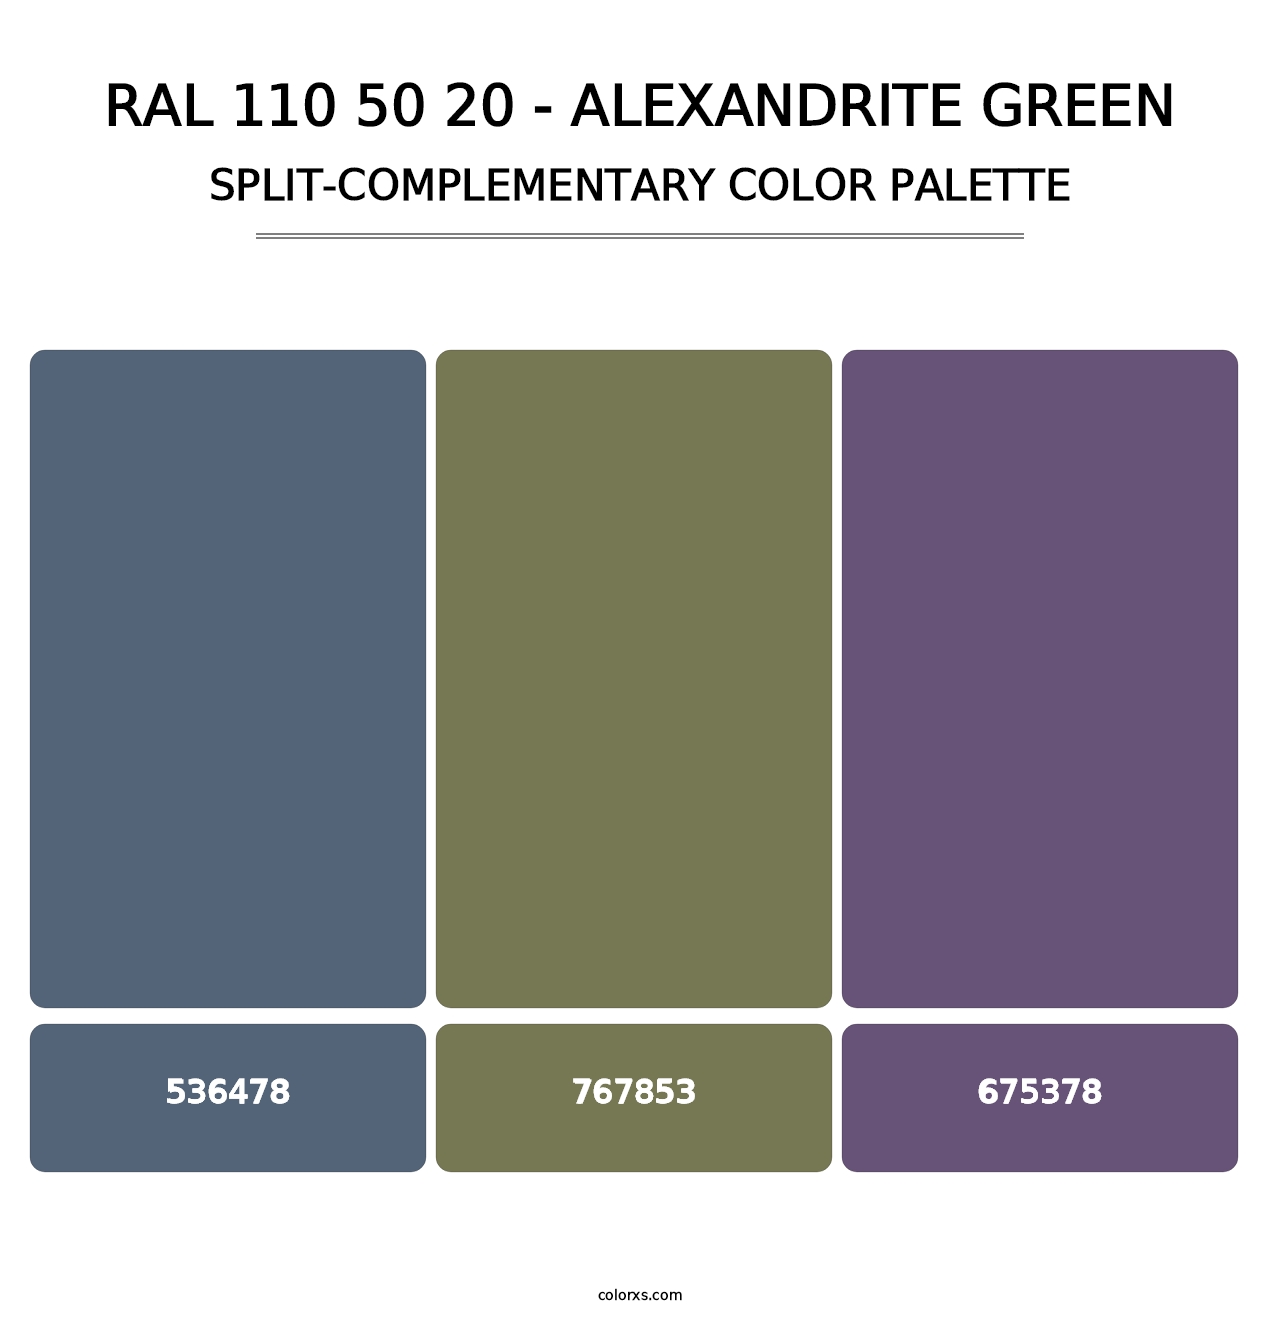 RAL 110 50 20 - Alexandrite Green - Split-Complementary Color Palette